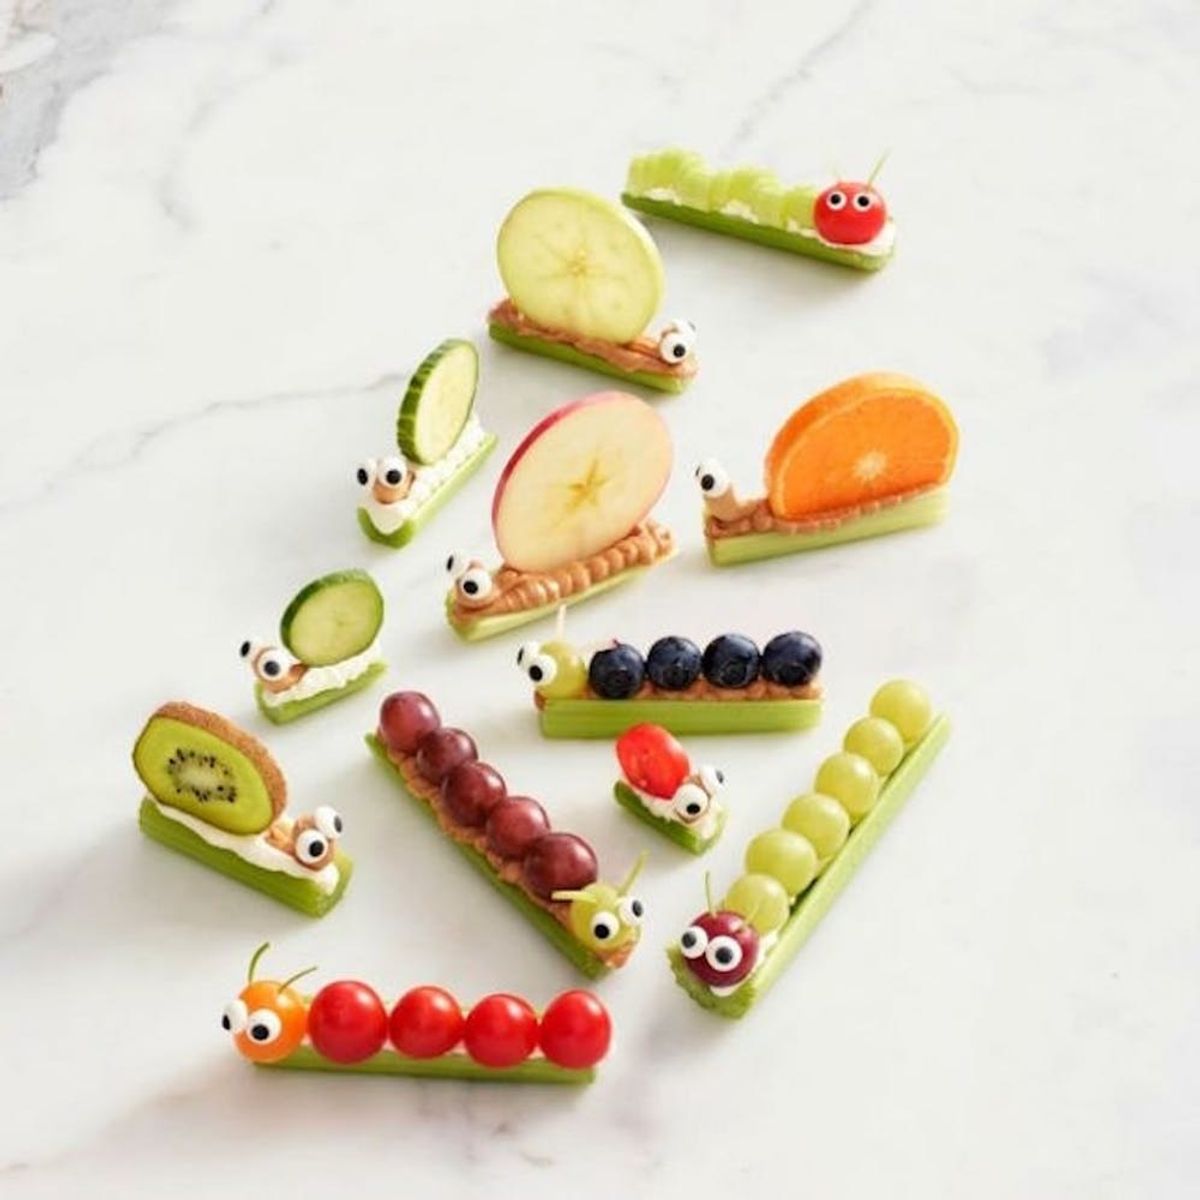 13 Adorable Snacks for the Child in All of Us